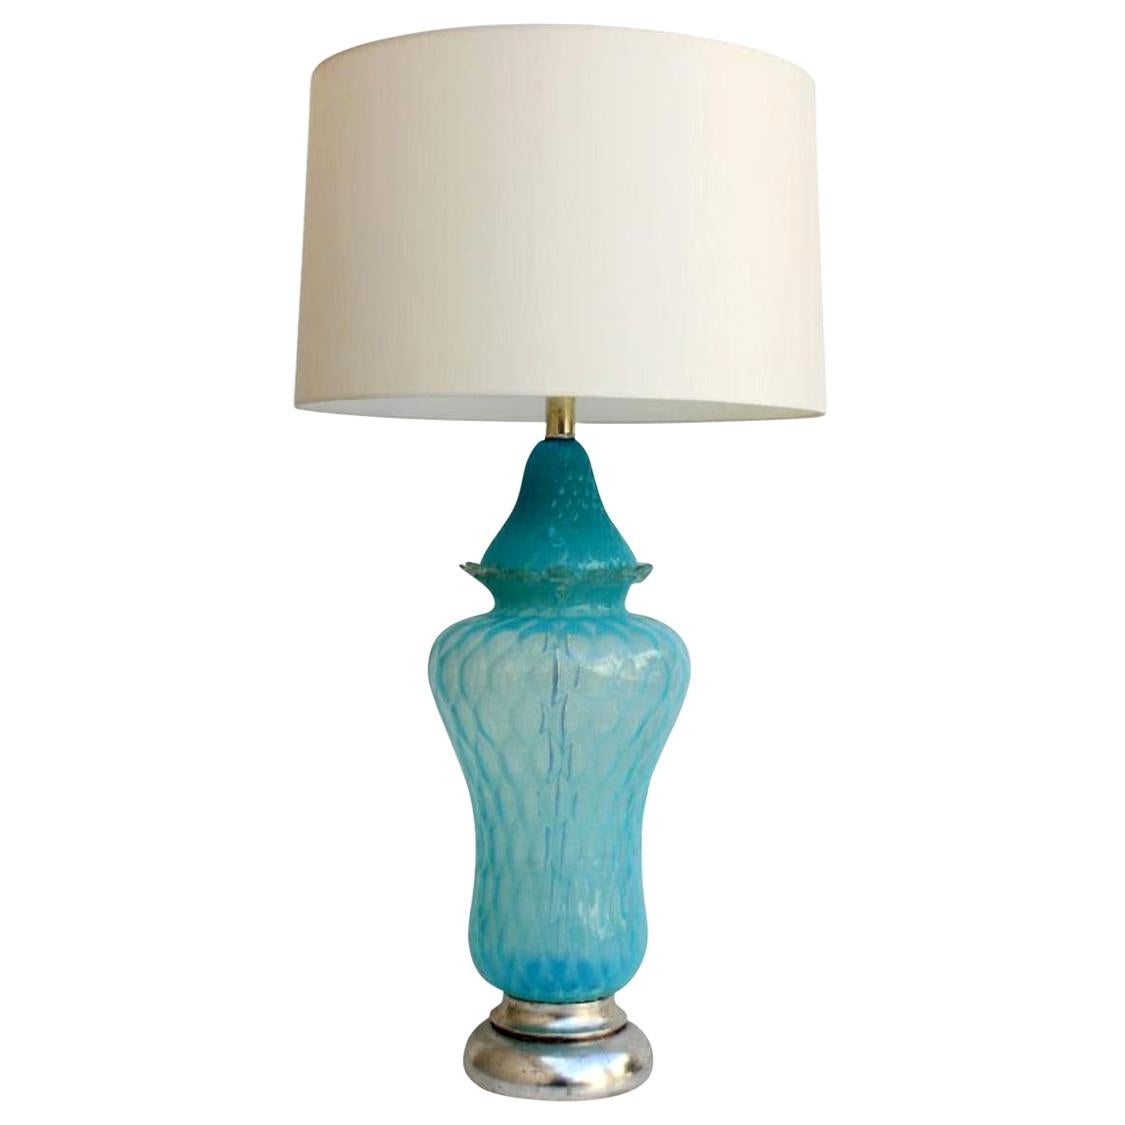 Vintage Hollywood Regency Turquoise Quilted Murano Glass Table Lamp